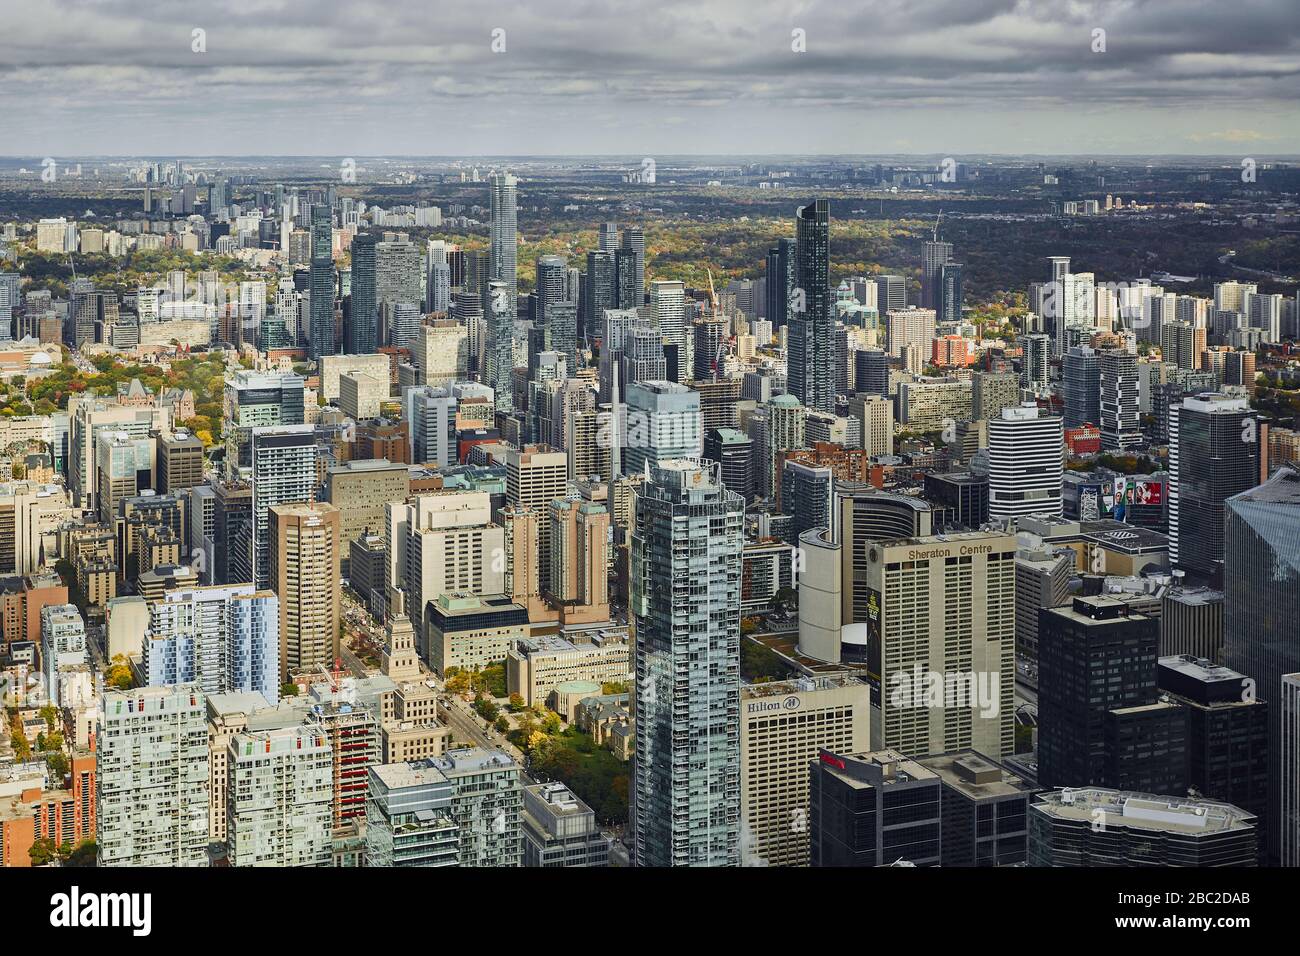 Looking out across Toronto from the CN Tower. Stock Photo